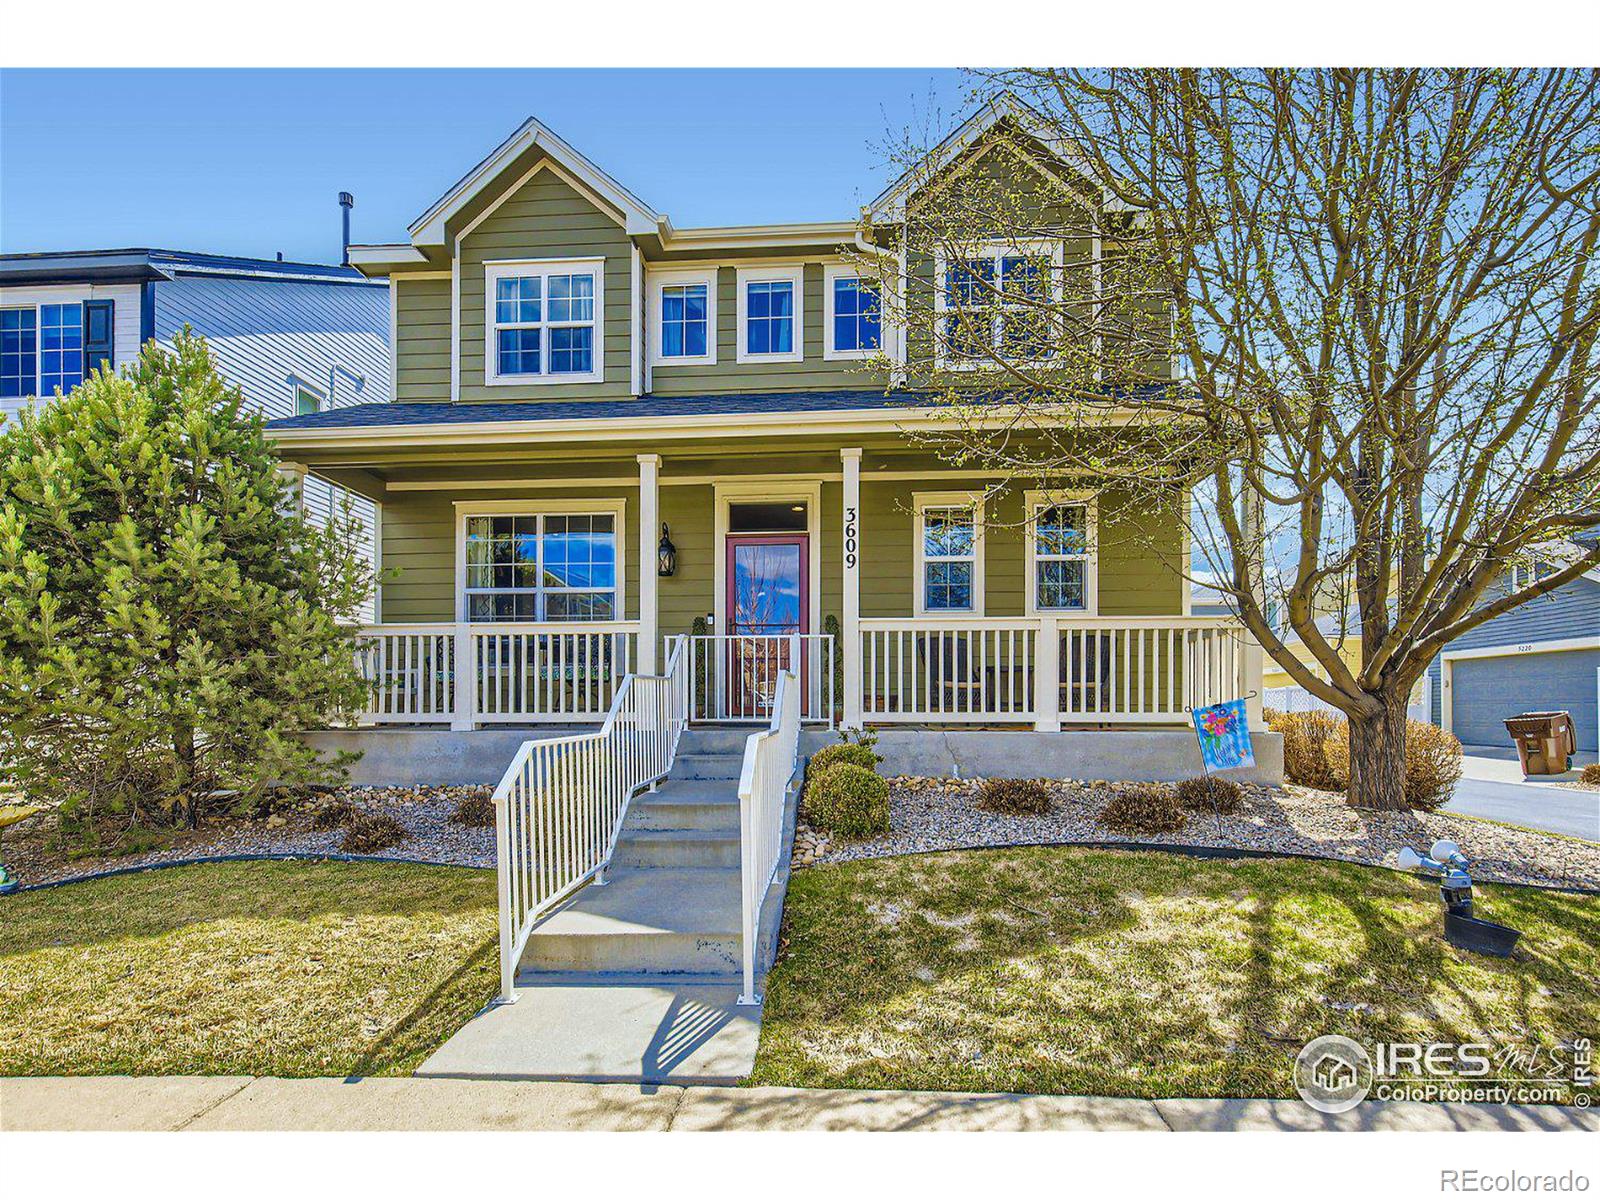 3609  Galileo Drive, fort collins MLS: 4567891006451 Beds: 3 Baths: 3 Price: $650,000